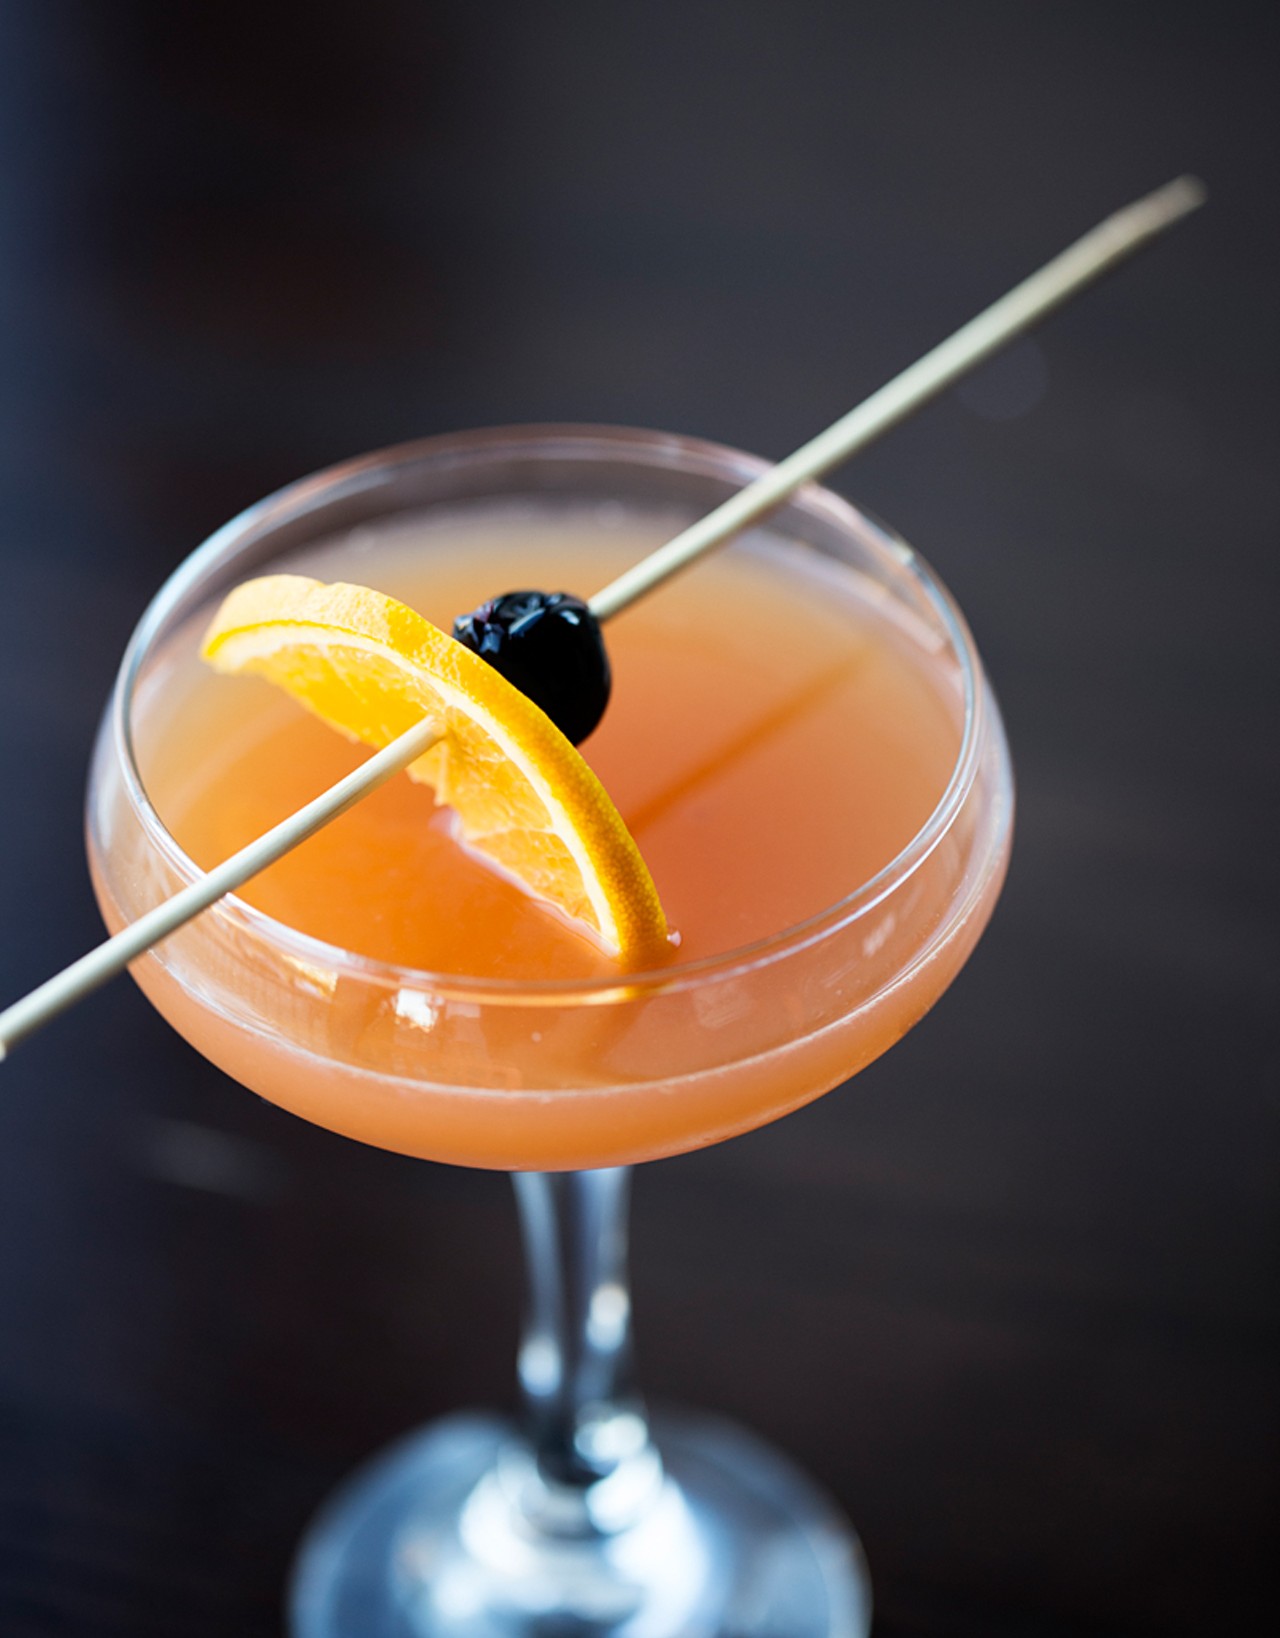 "Benny & the Jets" is made with bourbon, Benedictine liqueur, Aperol and orange juice.